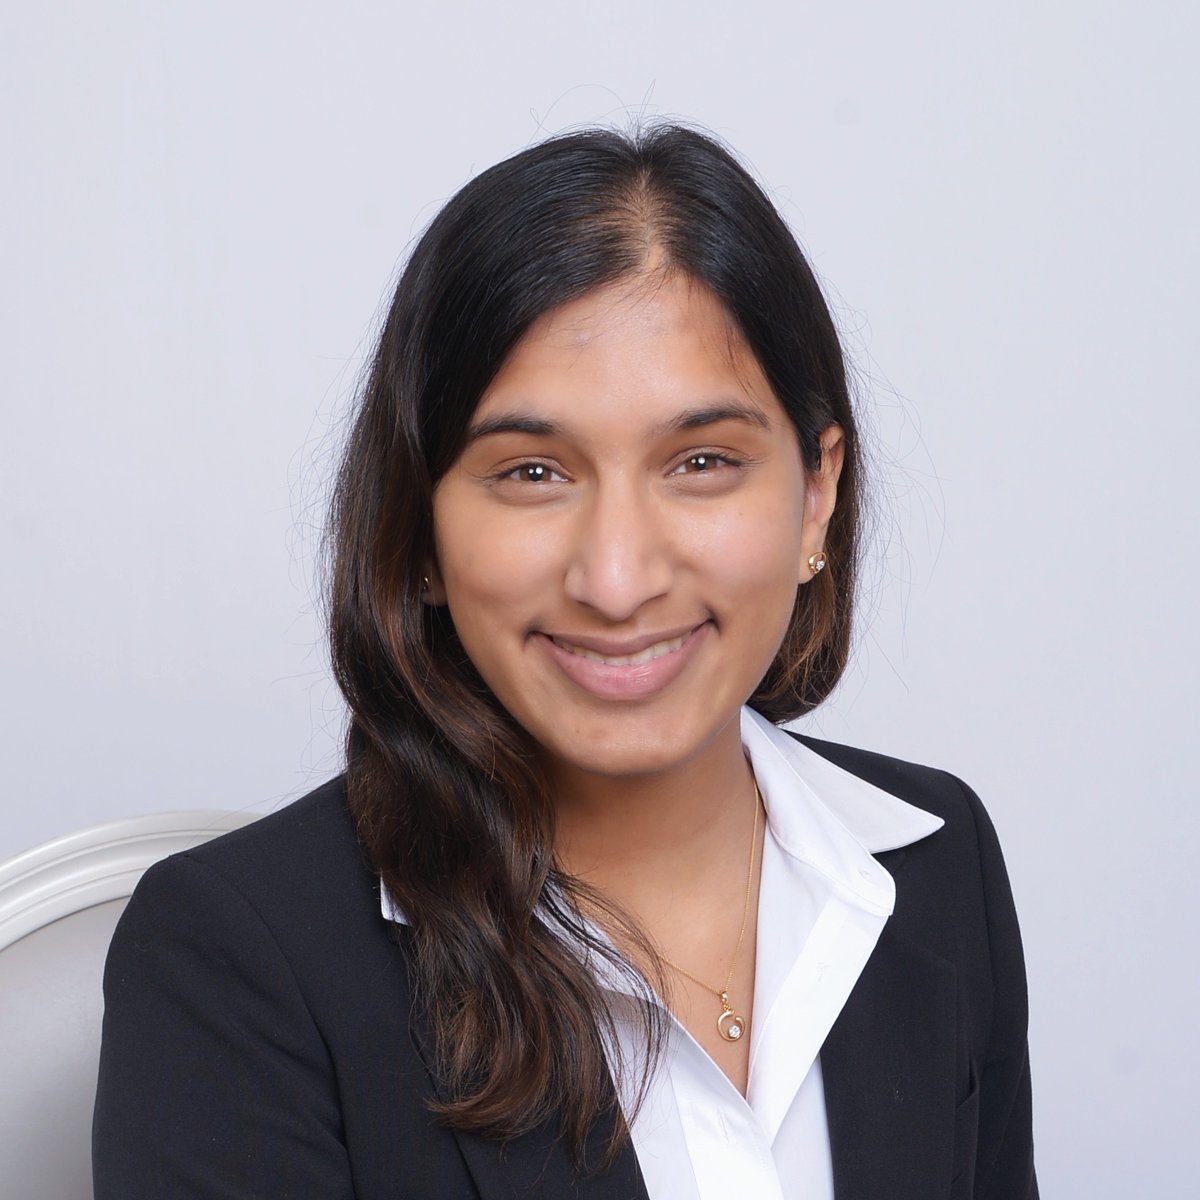 Aditi Nayak '23 is one of 150 #SchwarzmanScholars chosen from among a near-record high of over 4,000 applicants worldwide. 

She will soon venture to China to unite her interests in science communication and global affairs. bit.ly/4aOPJhW